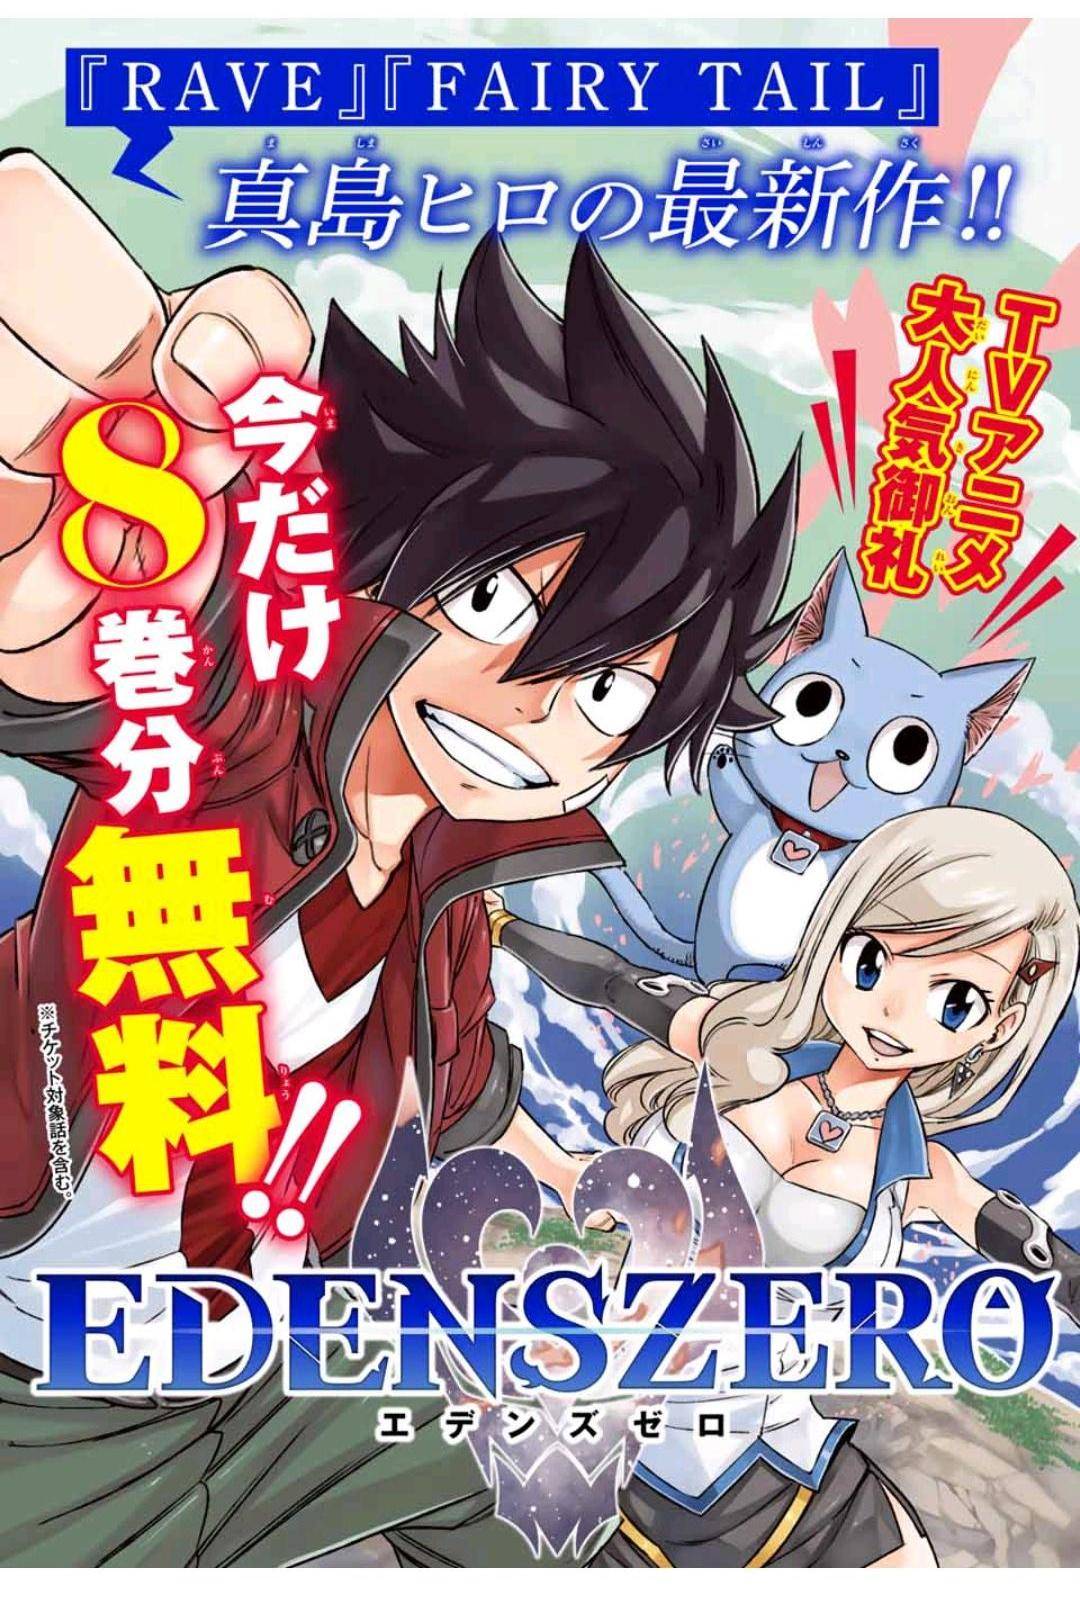 fairy tail episodes online free